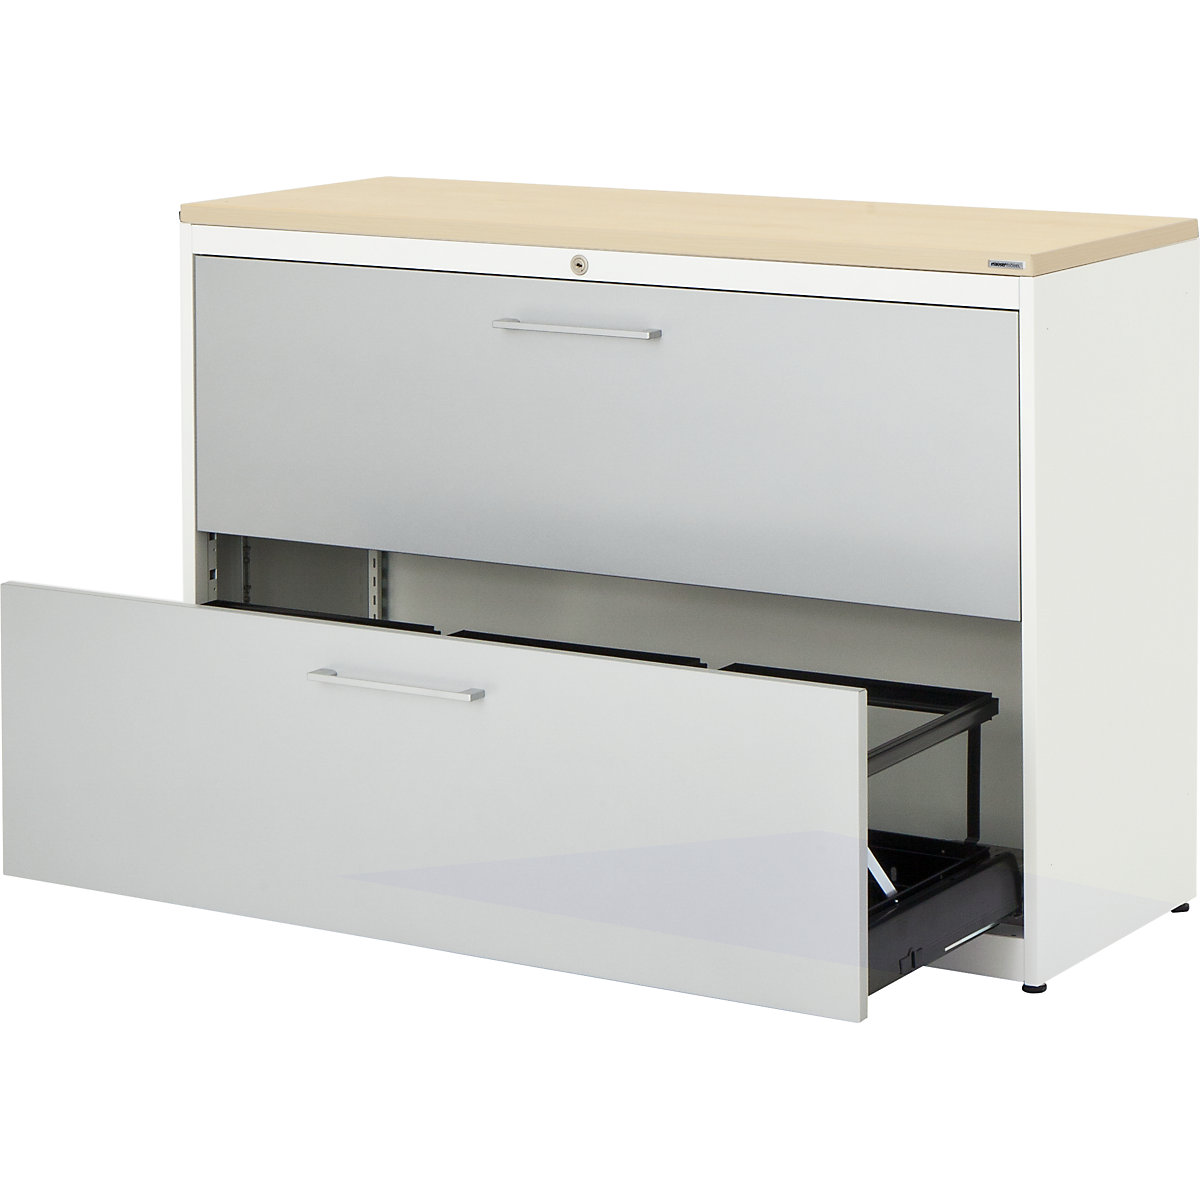 Suspension filing cabinet – mauser, plastic panel, 2 drawers, 3 tracks, with dampers, pure white / white aluminium / maple-7